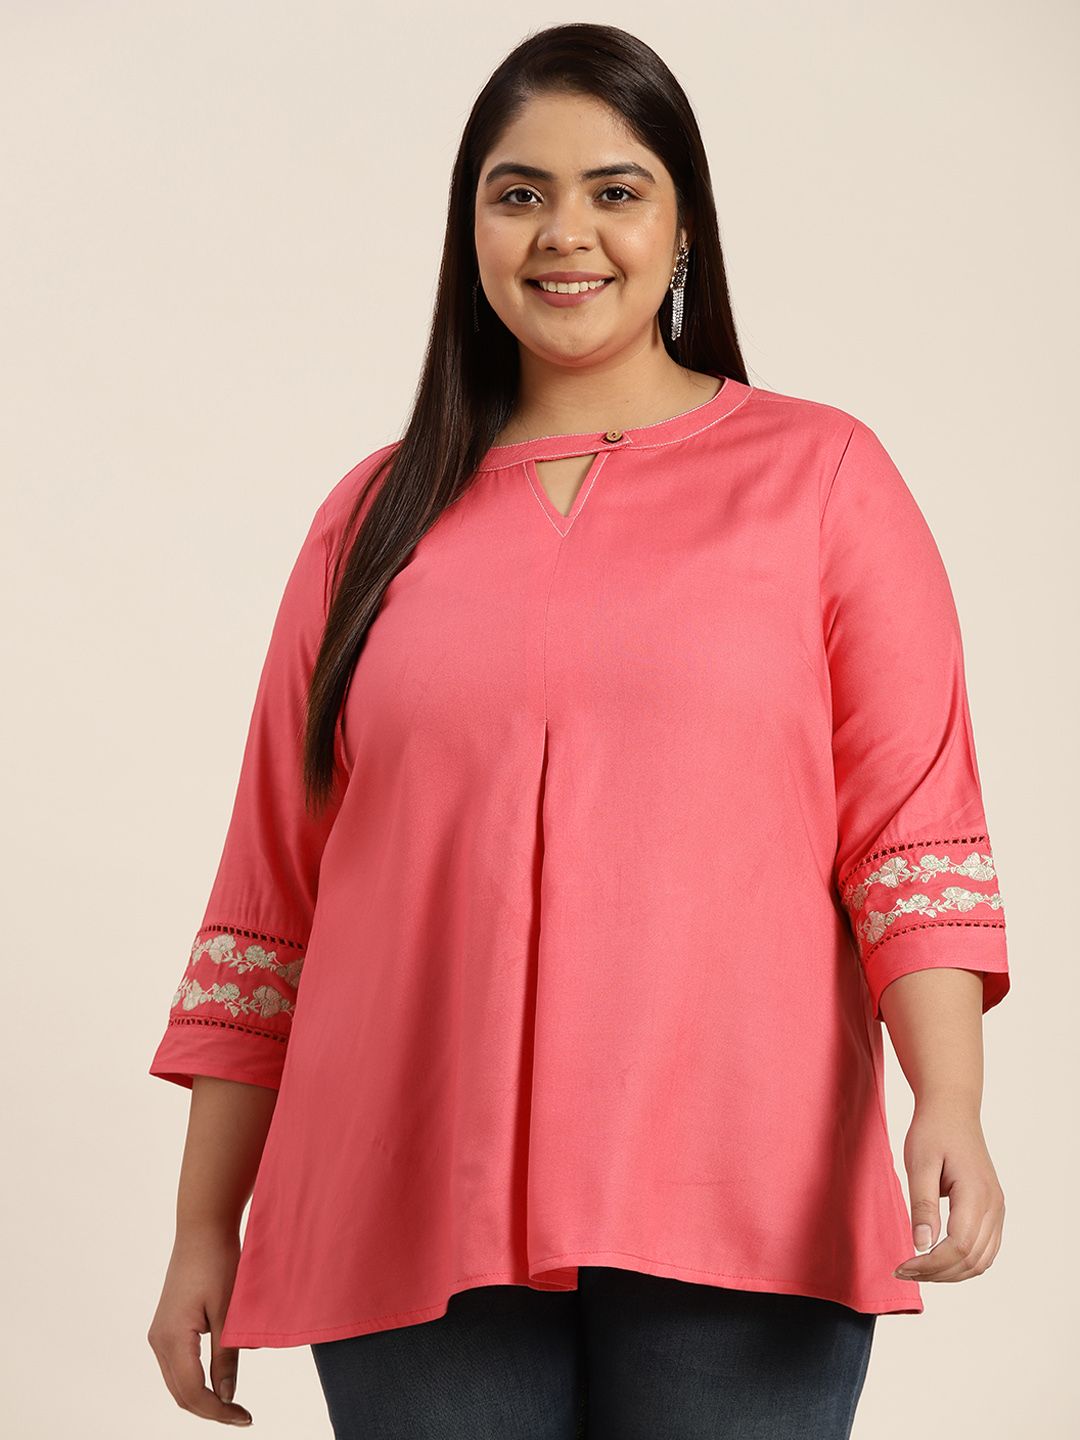 Sztori Plus Size Coral Pink Solid Keyhole Neck Pleated A-Line Kurti Price in India